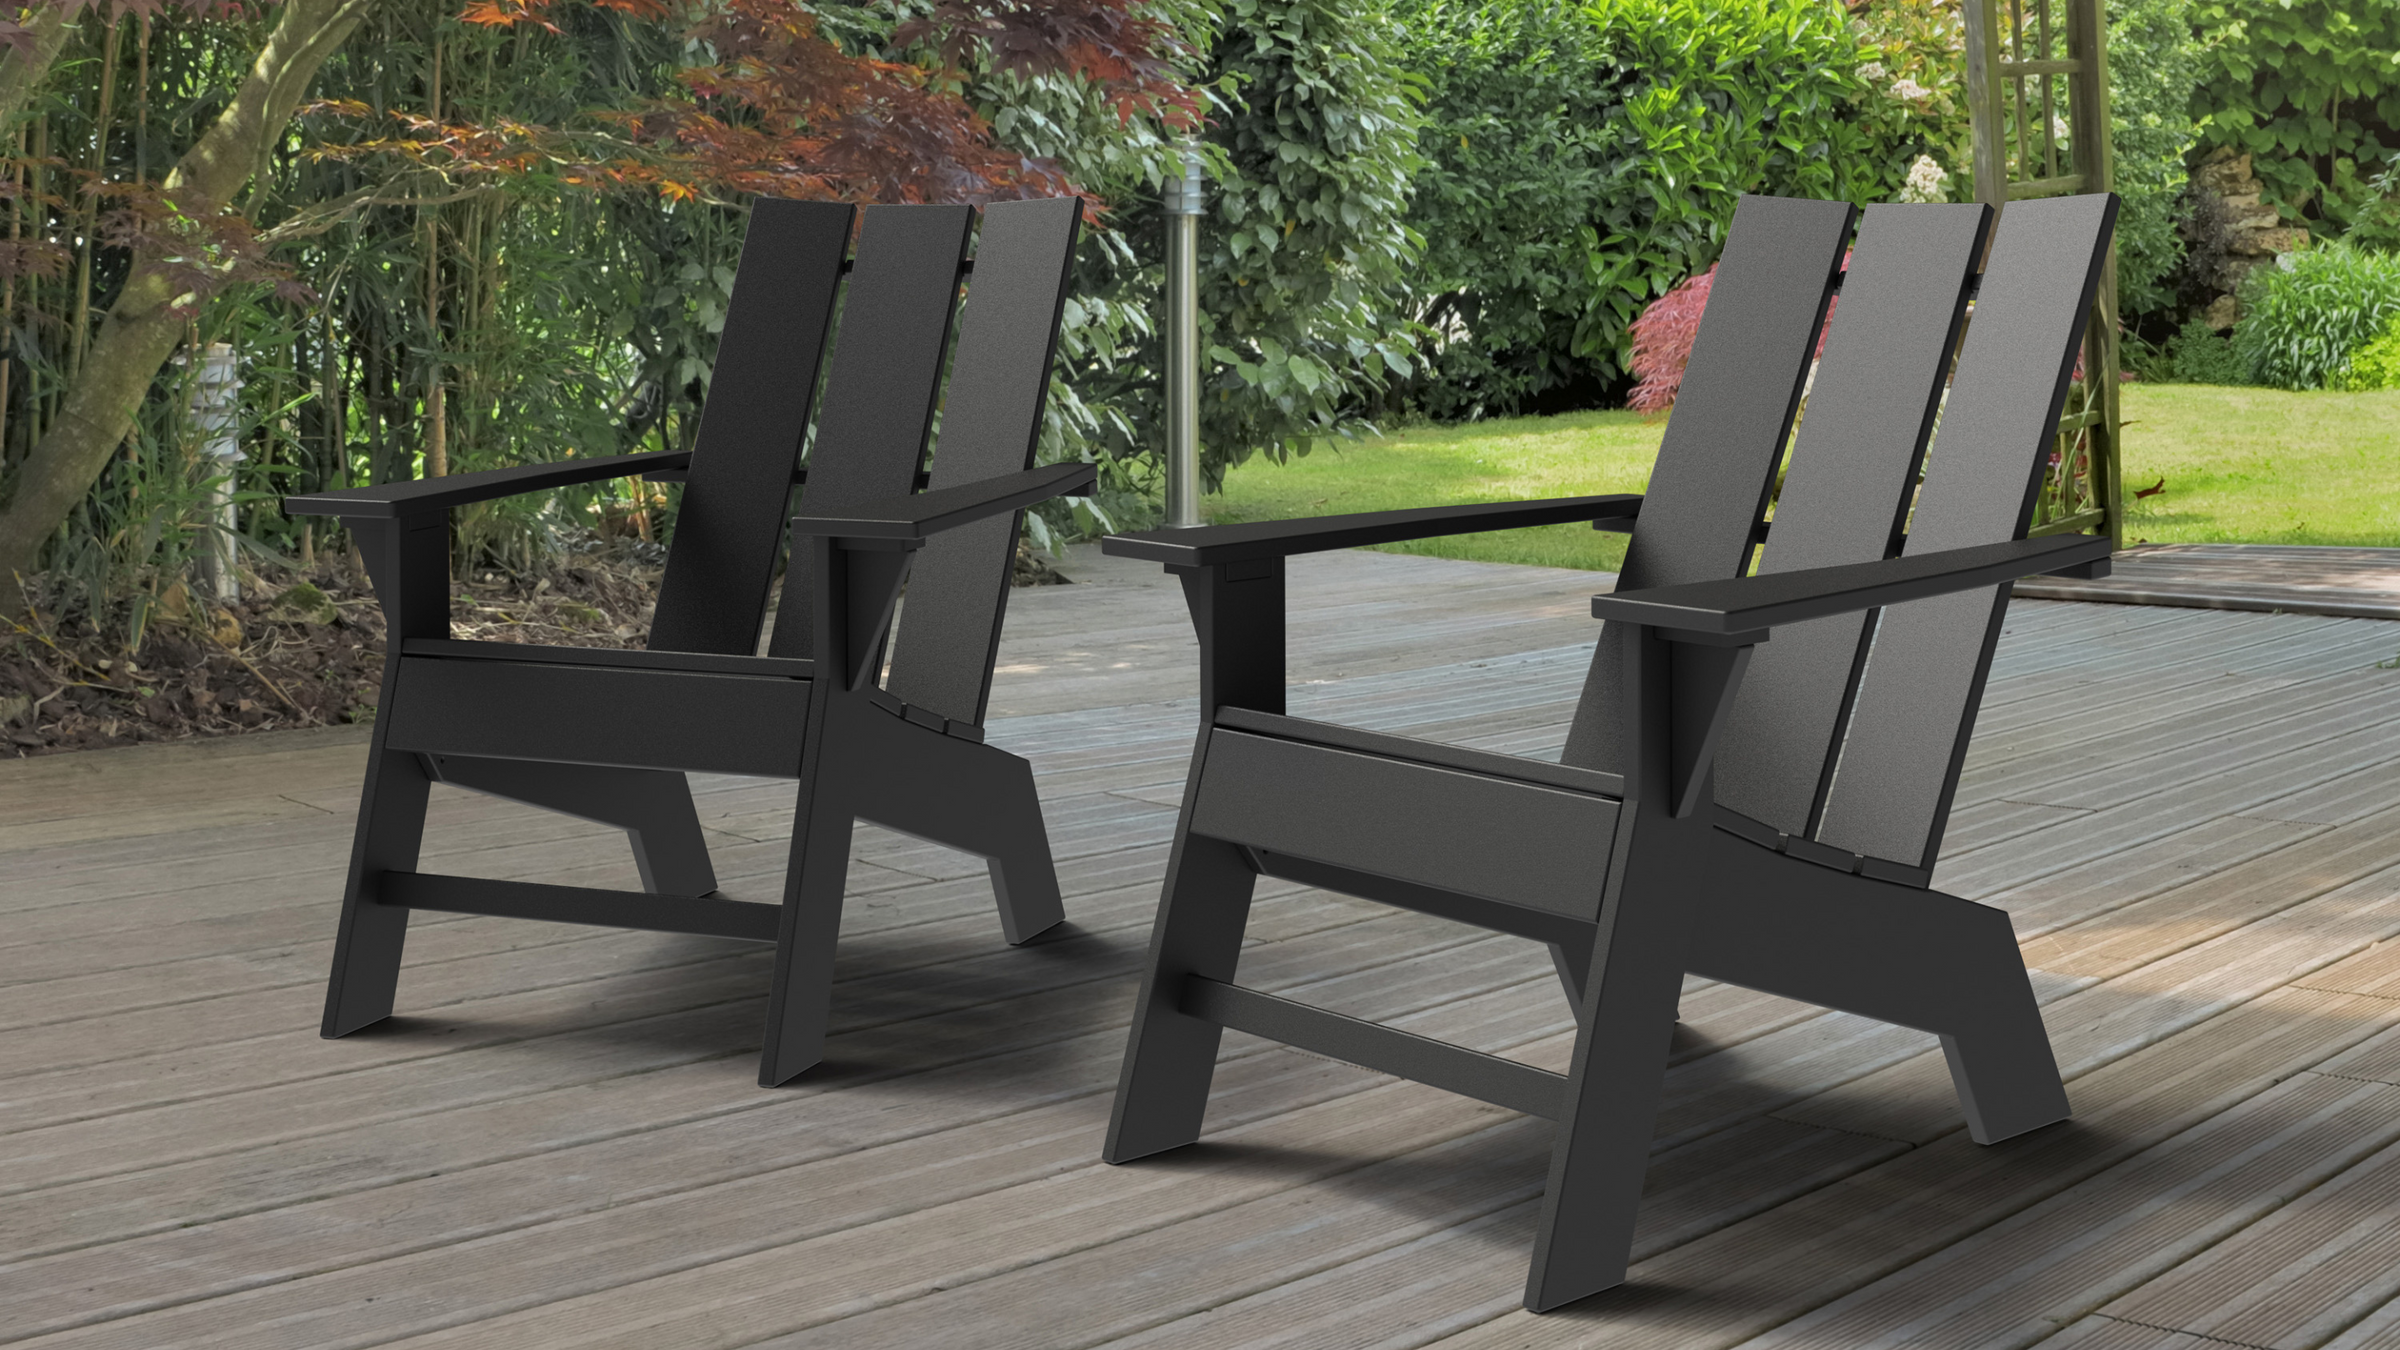 Black, outdoor lounge chairs. Made from recycled materials.